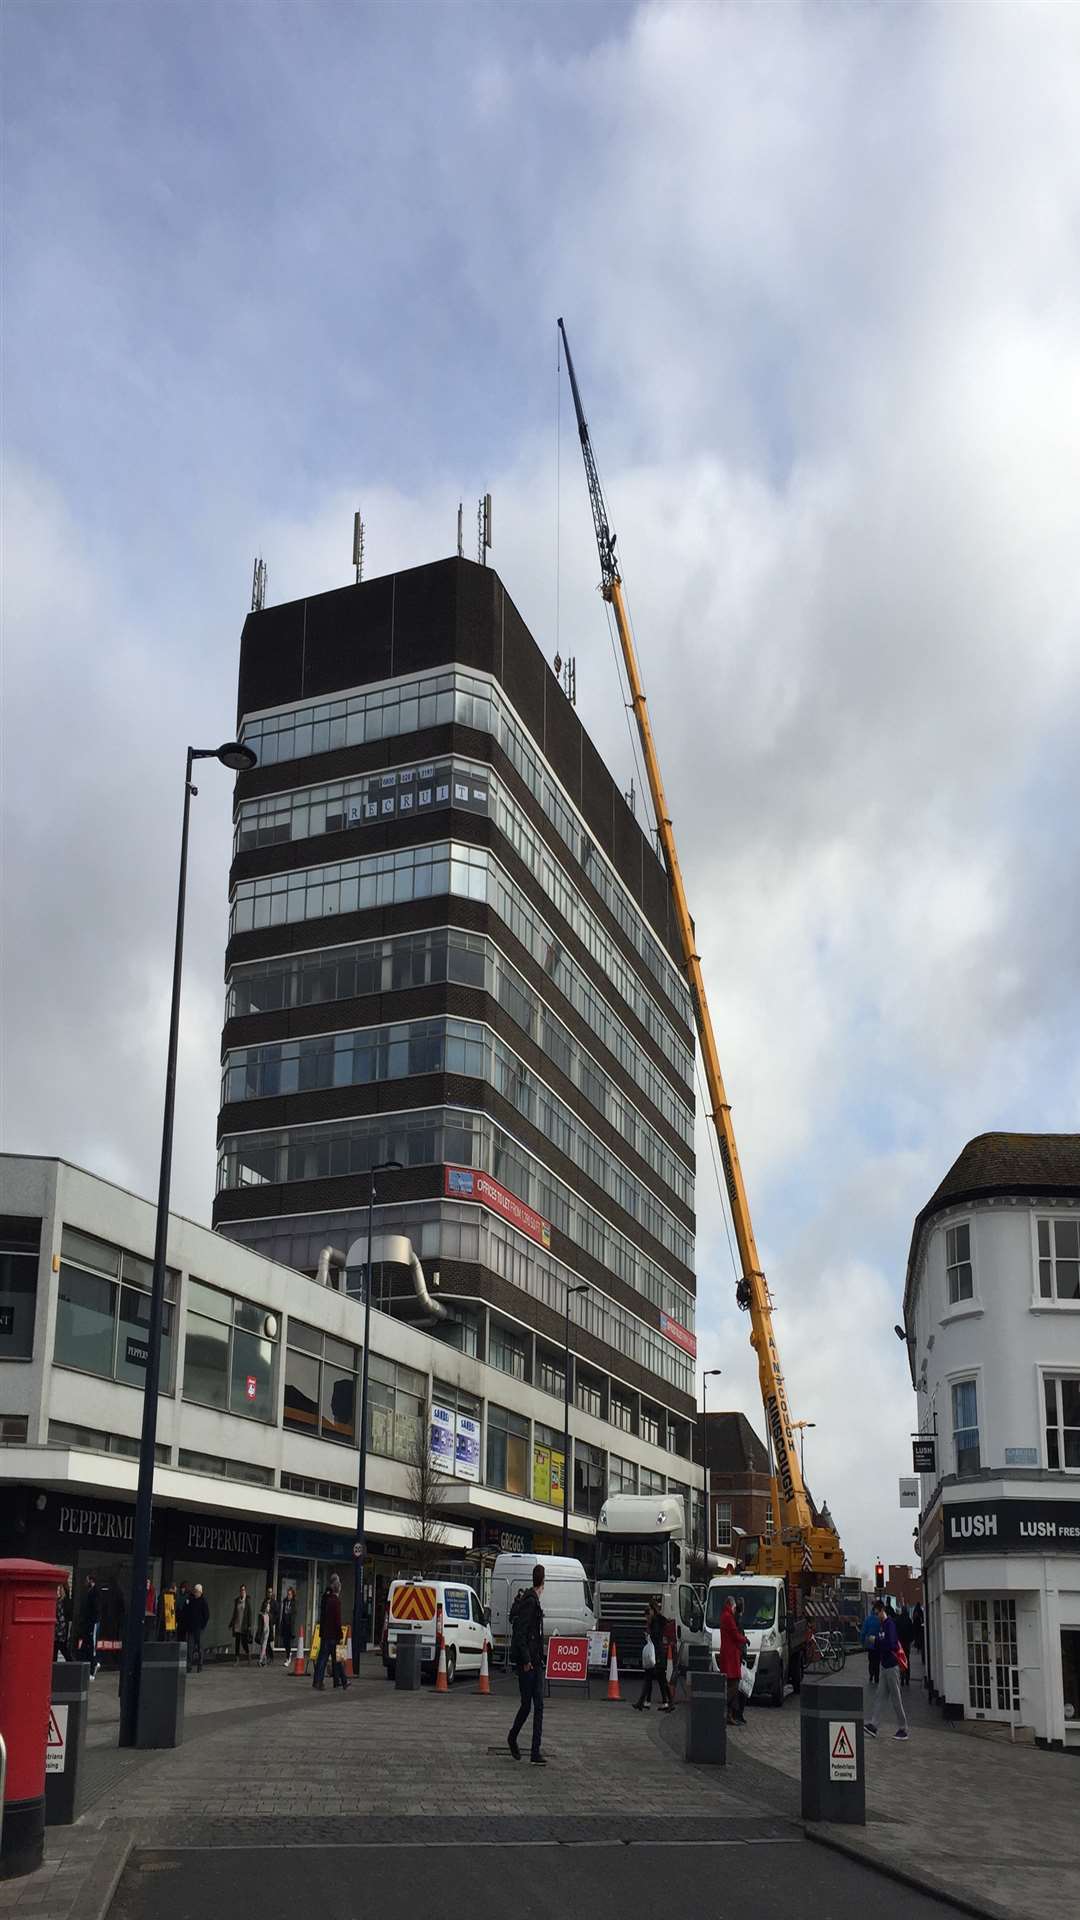 A crane is being used to complete the building works in King Street, Maidstone